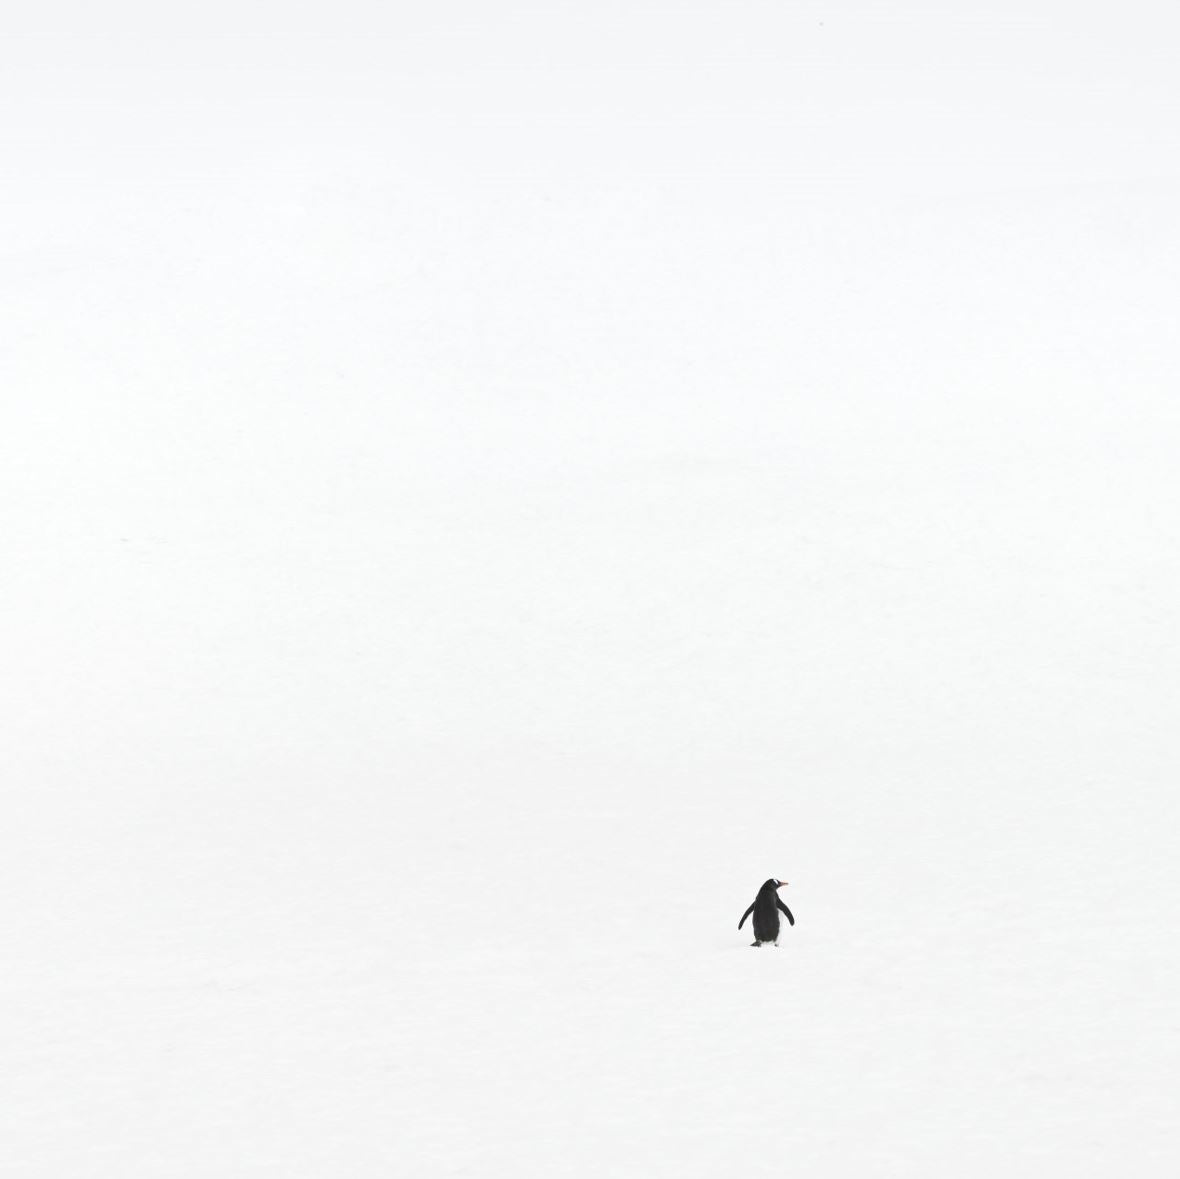 Lost in Antarctica featured opacity image